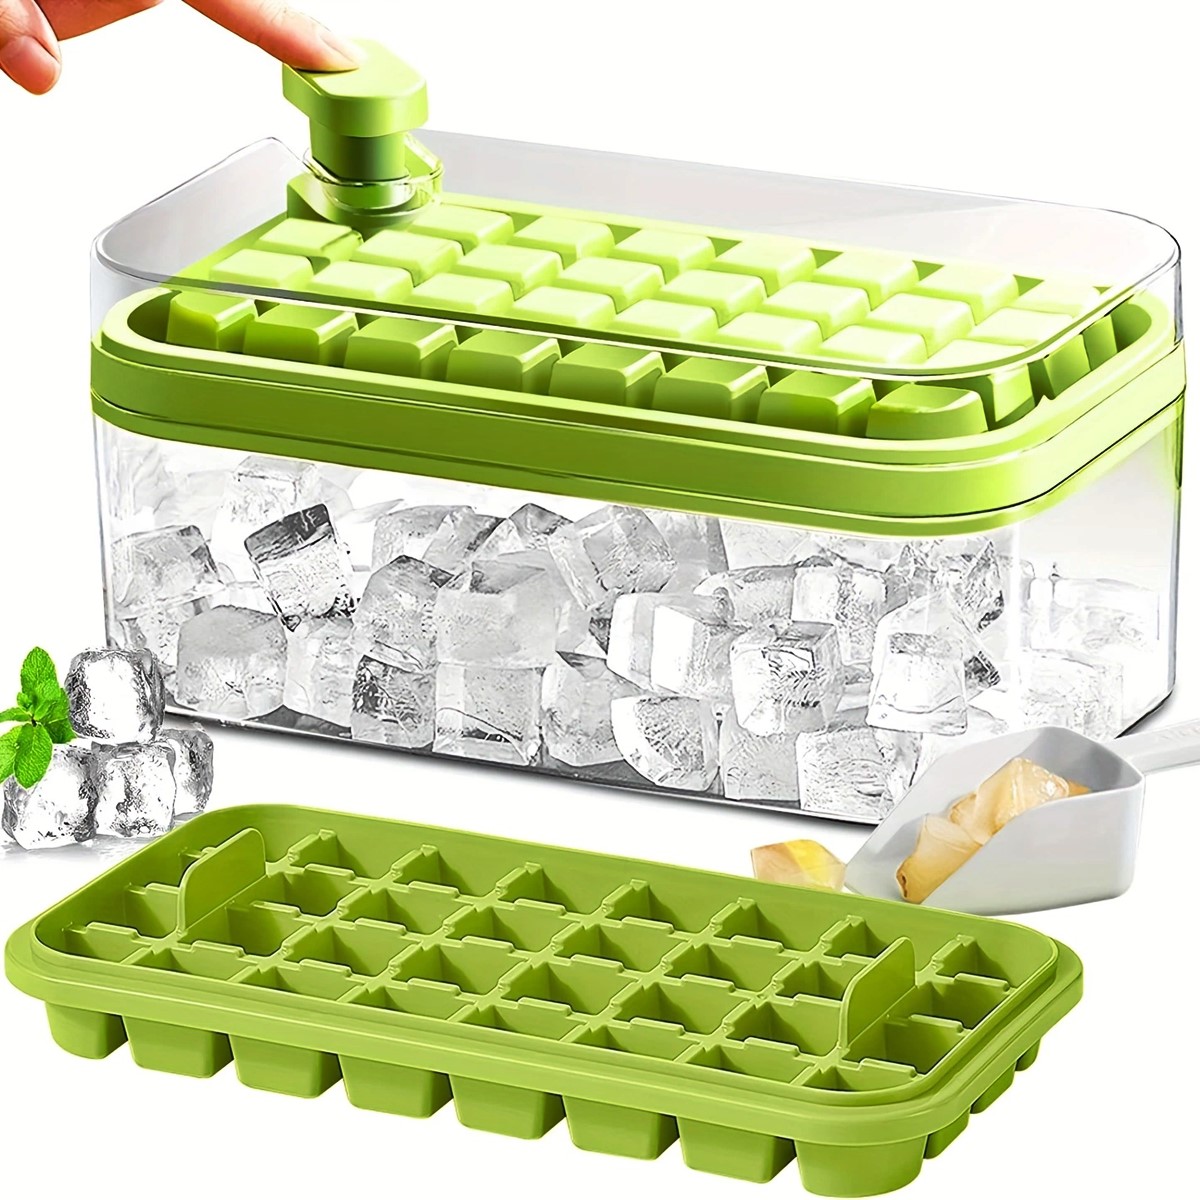 How Many Ounces In An Ice Cube Tray